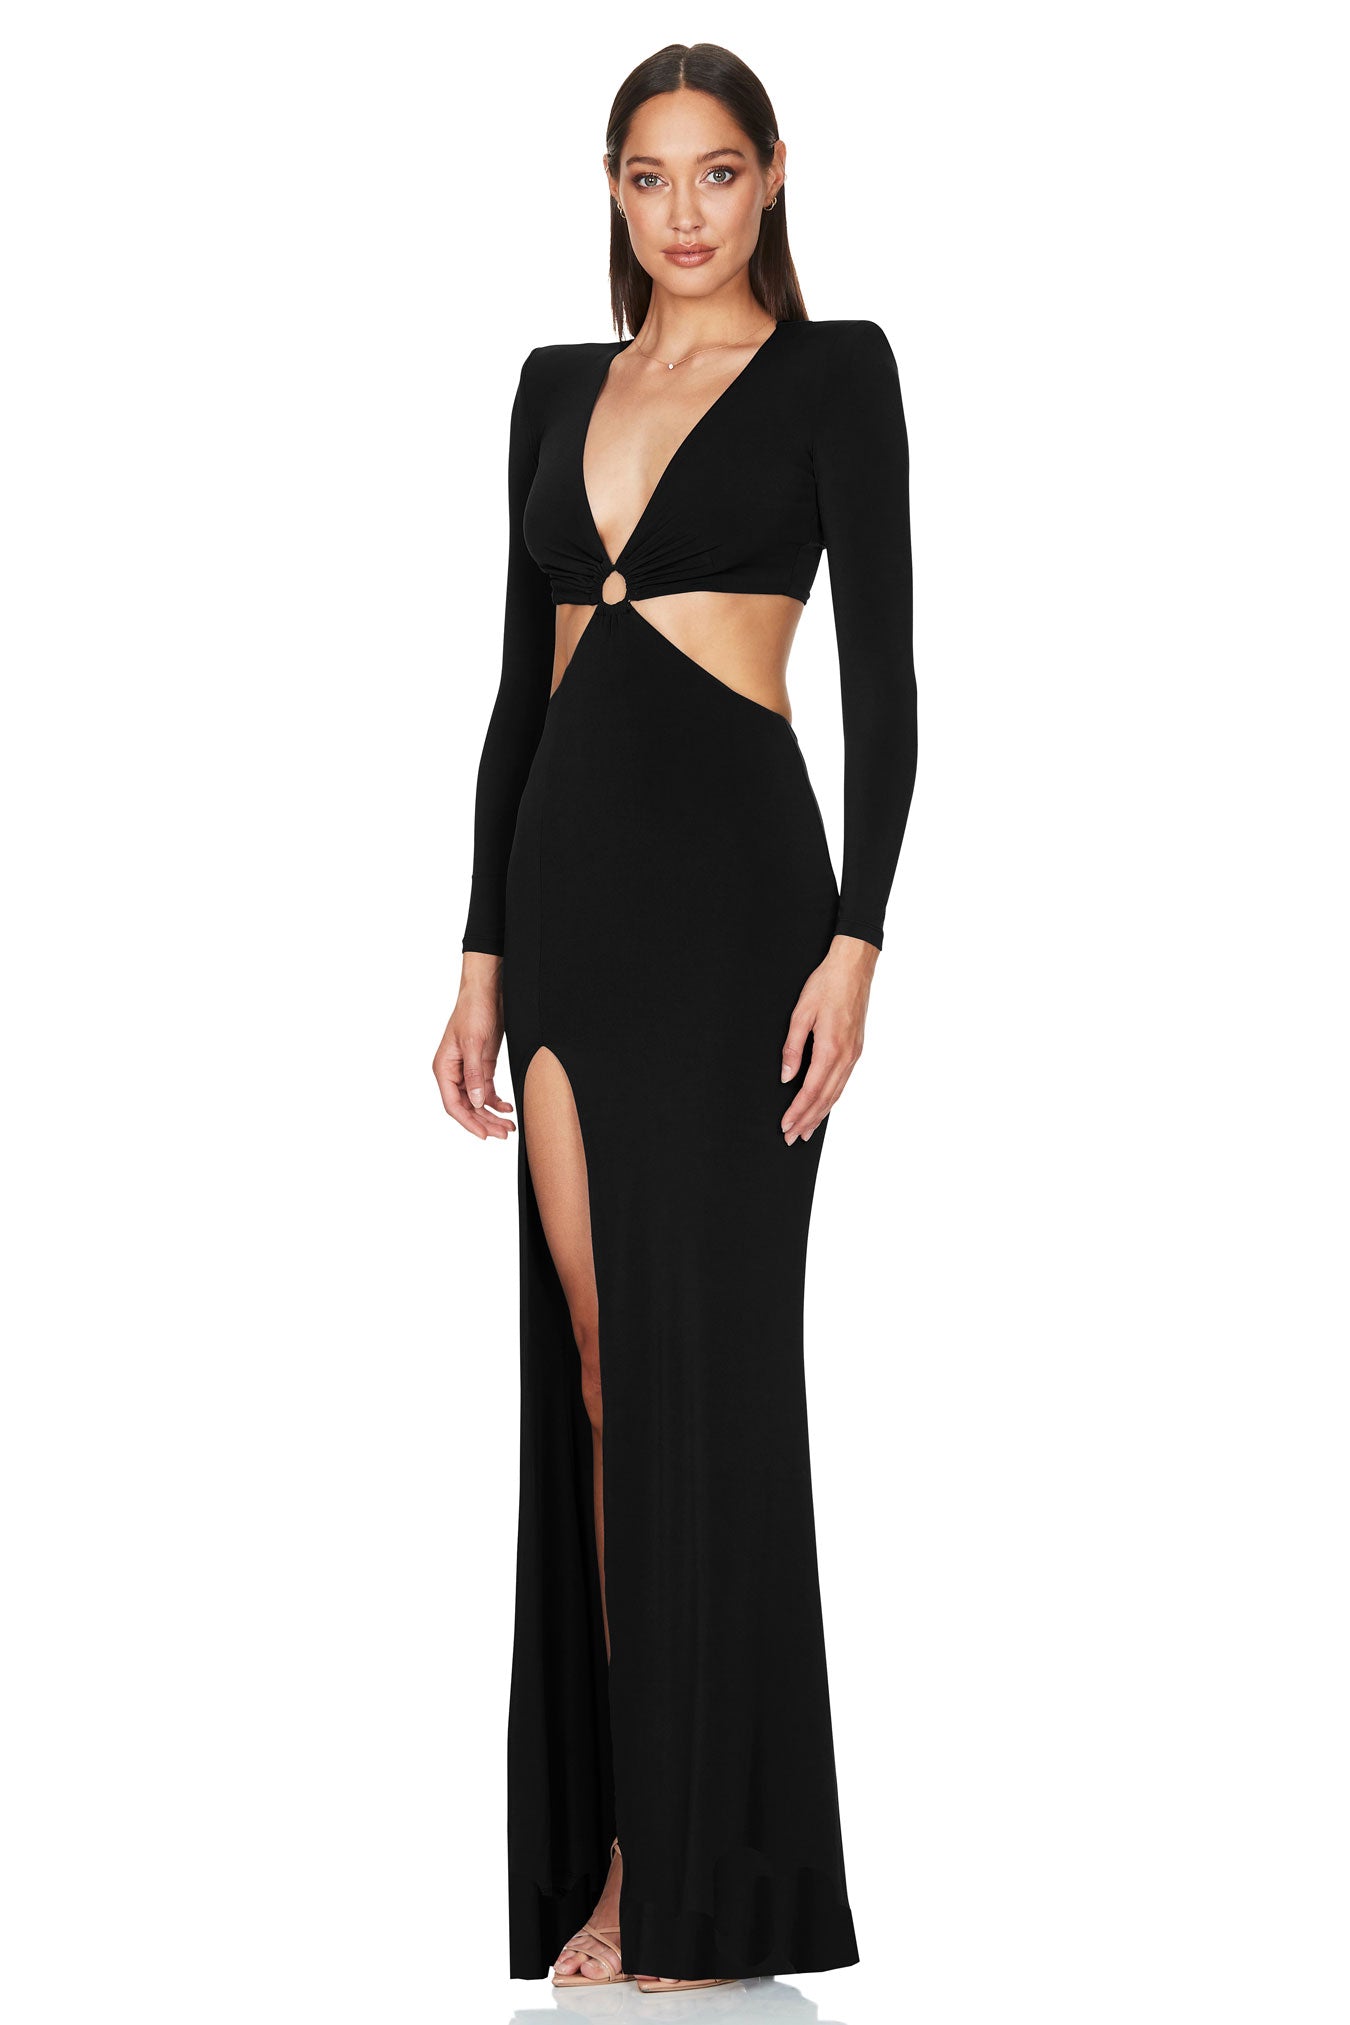 Riley Ring Cut Out Gown Black